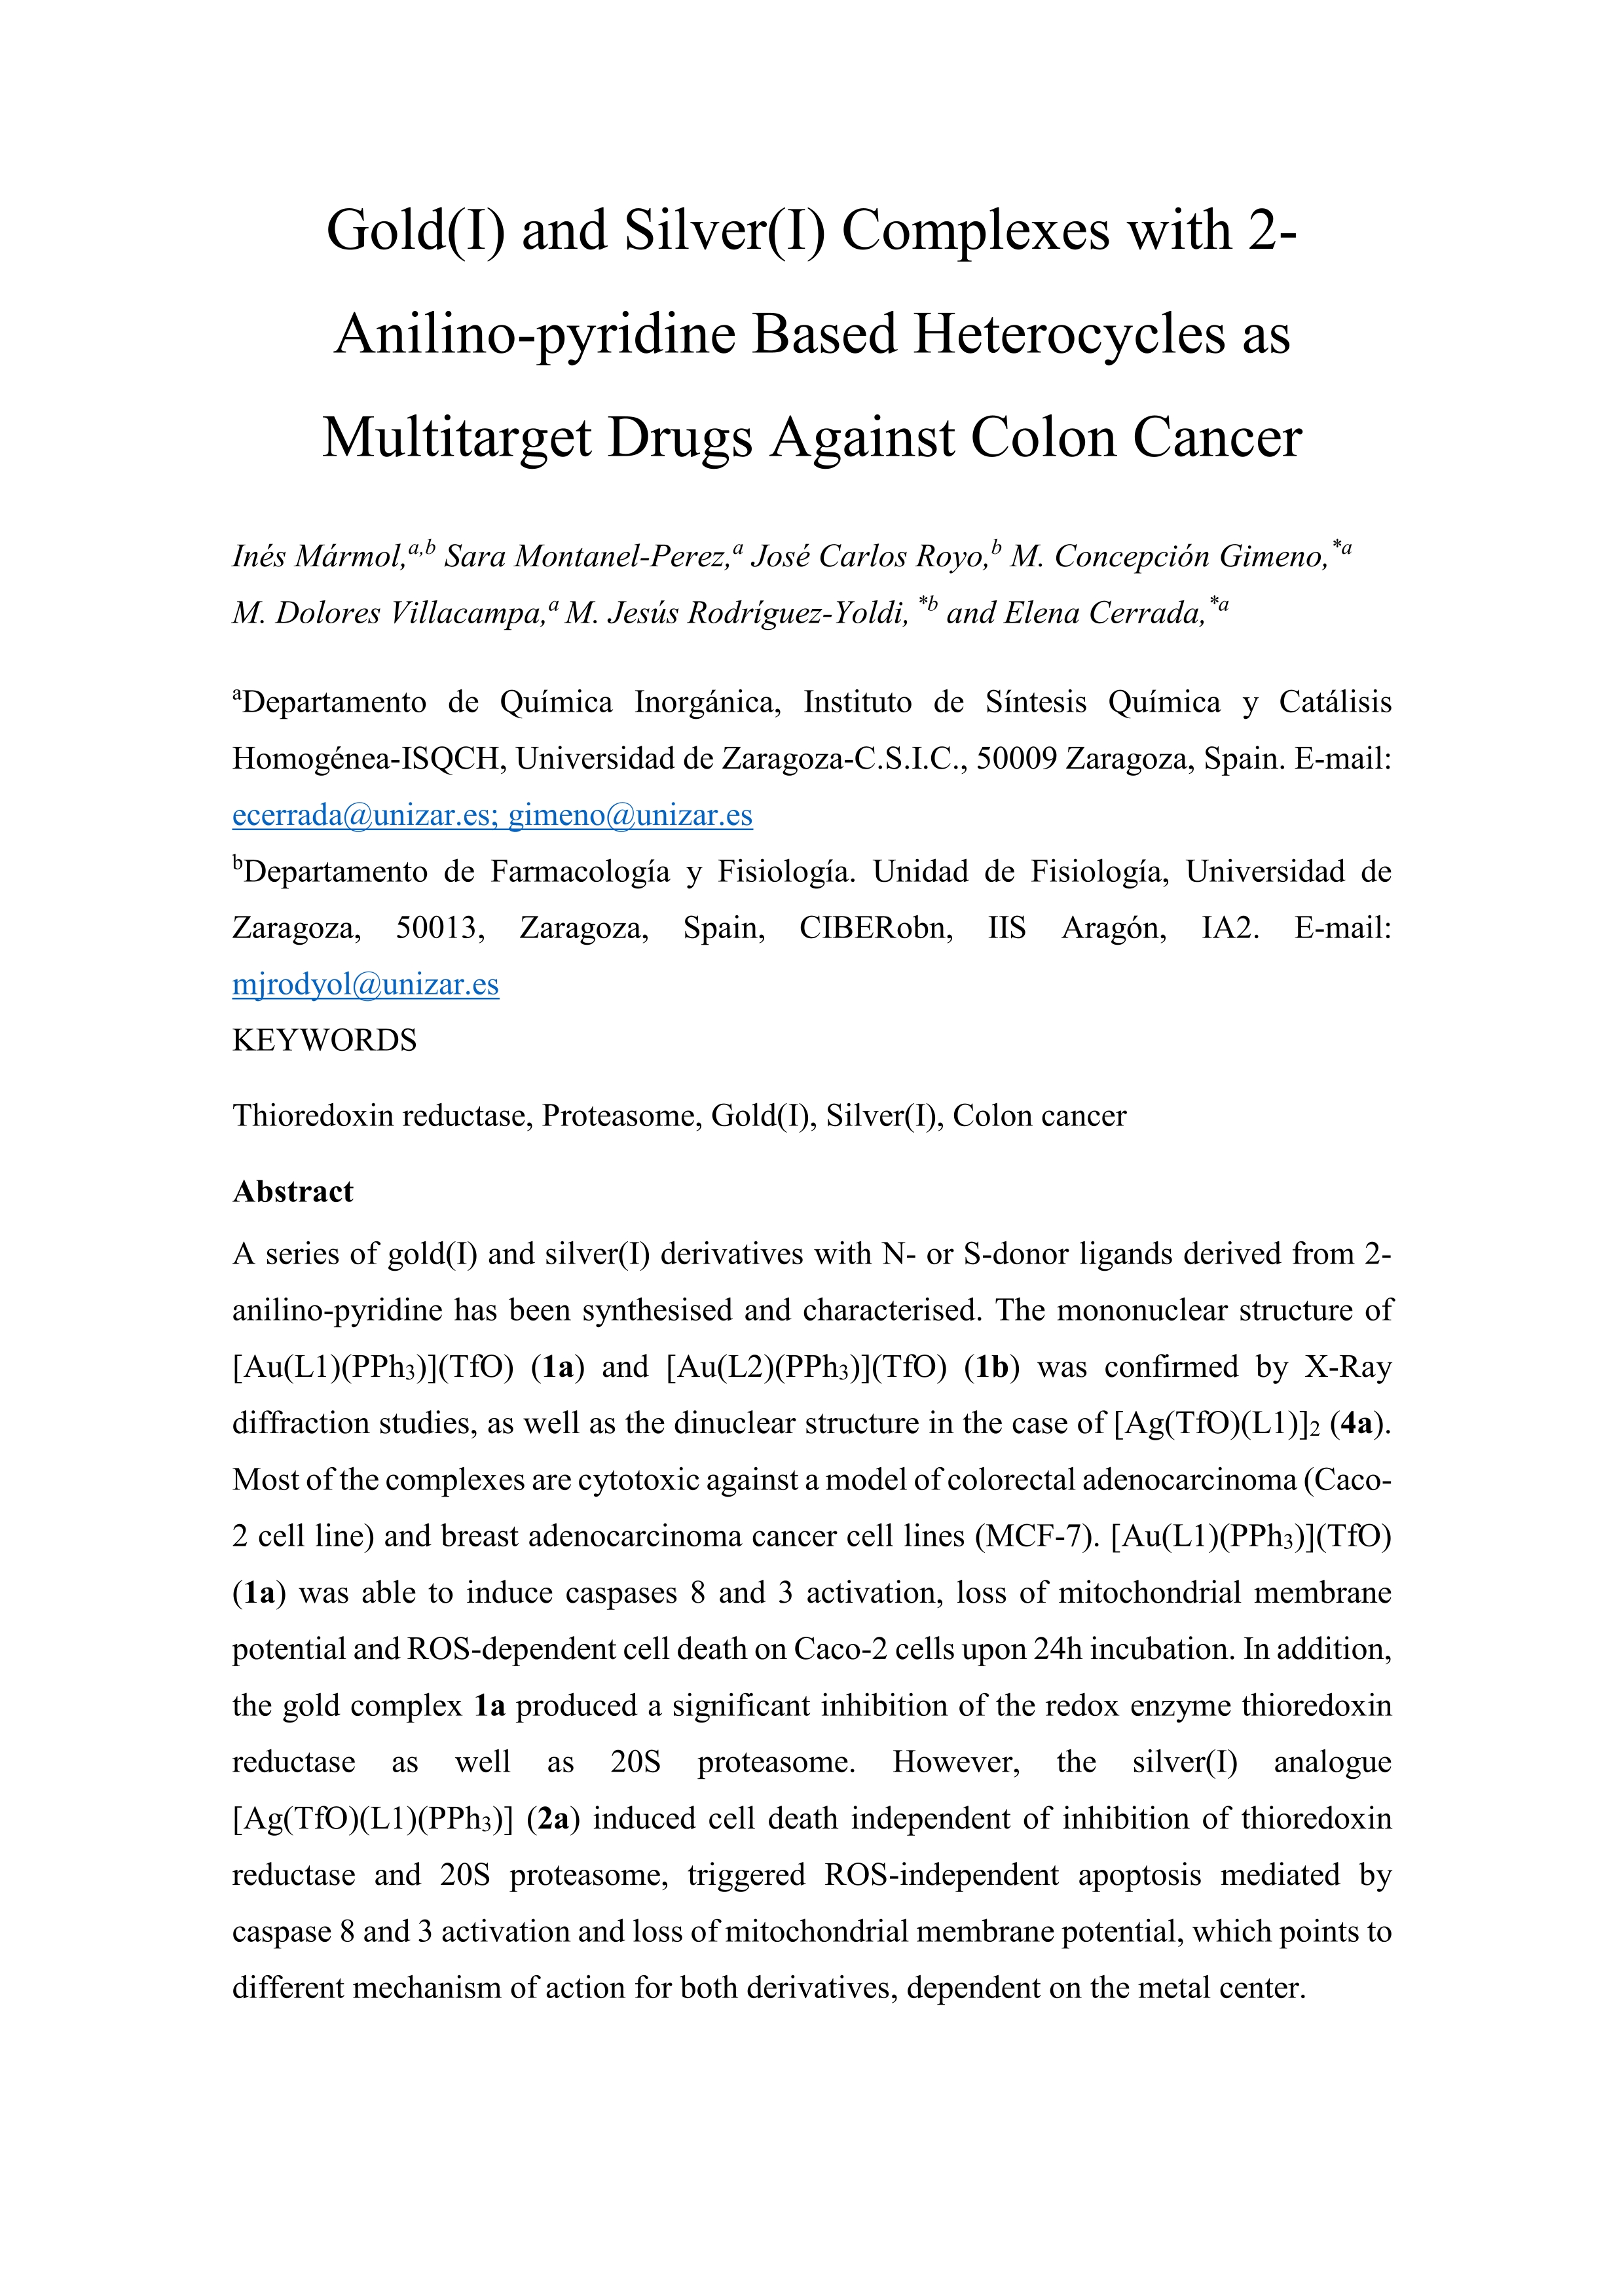 Gold(I) and Silver(I) Complexes with 2-Anilinopyridine-Based Heterocycles as Multitarget Drugs against Colon Cancer